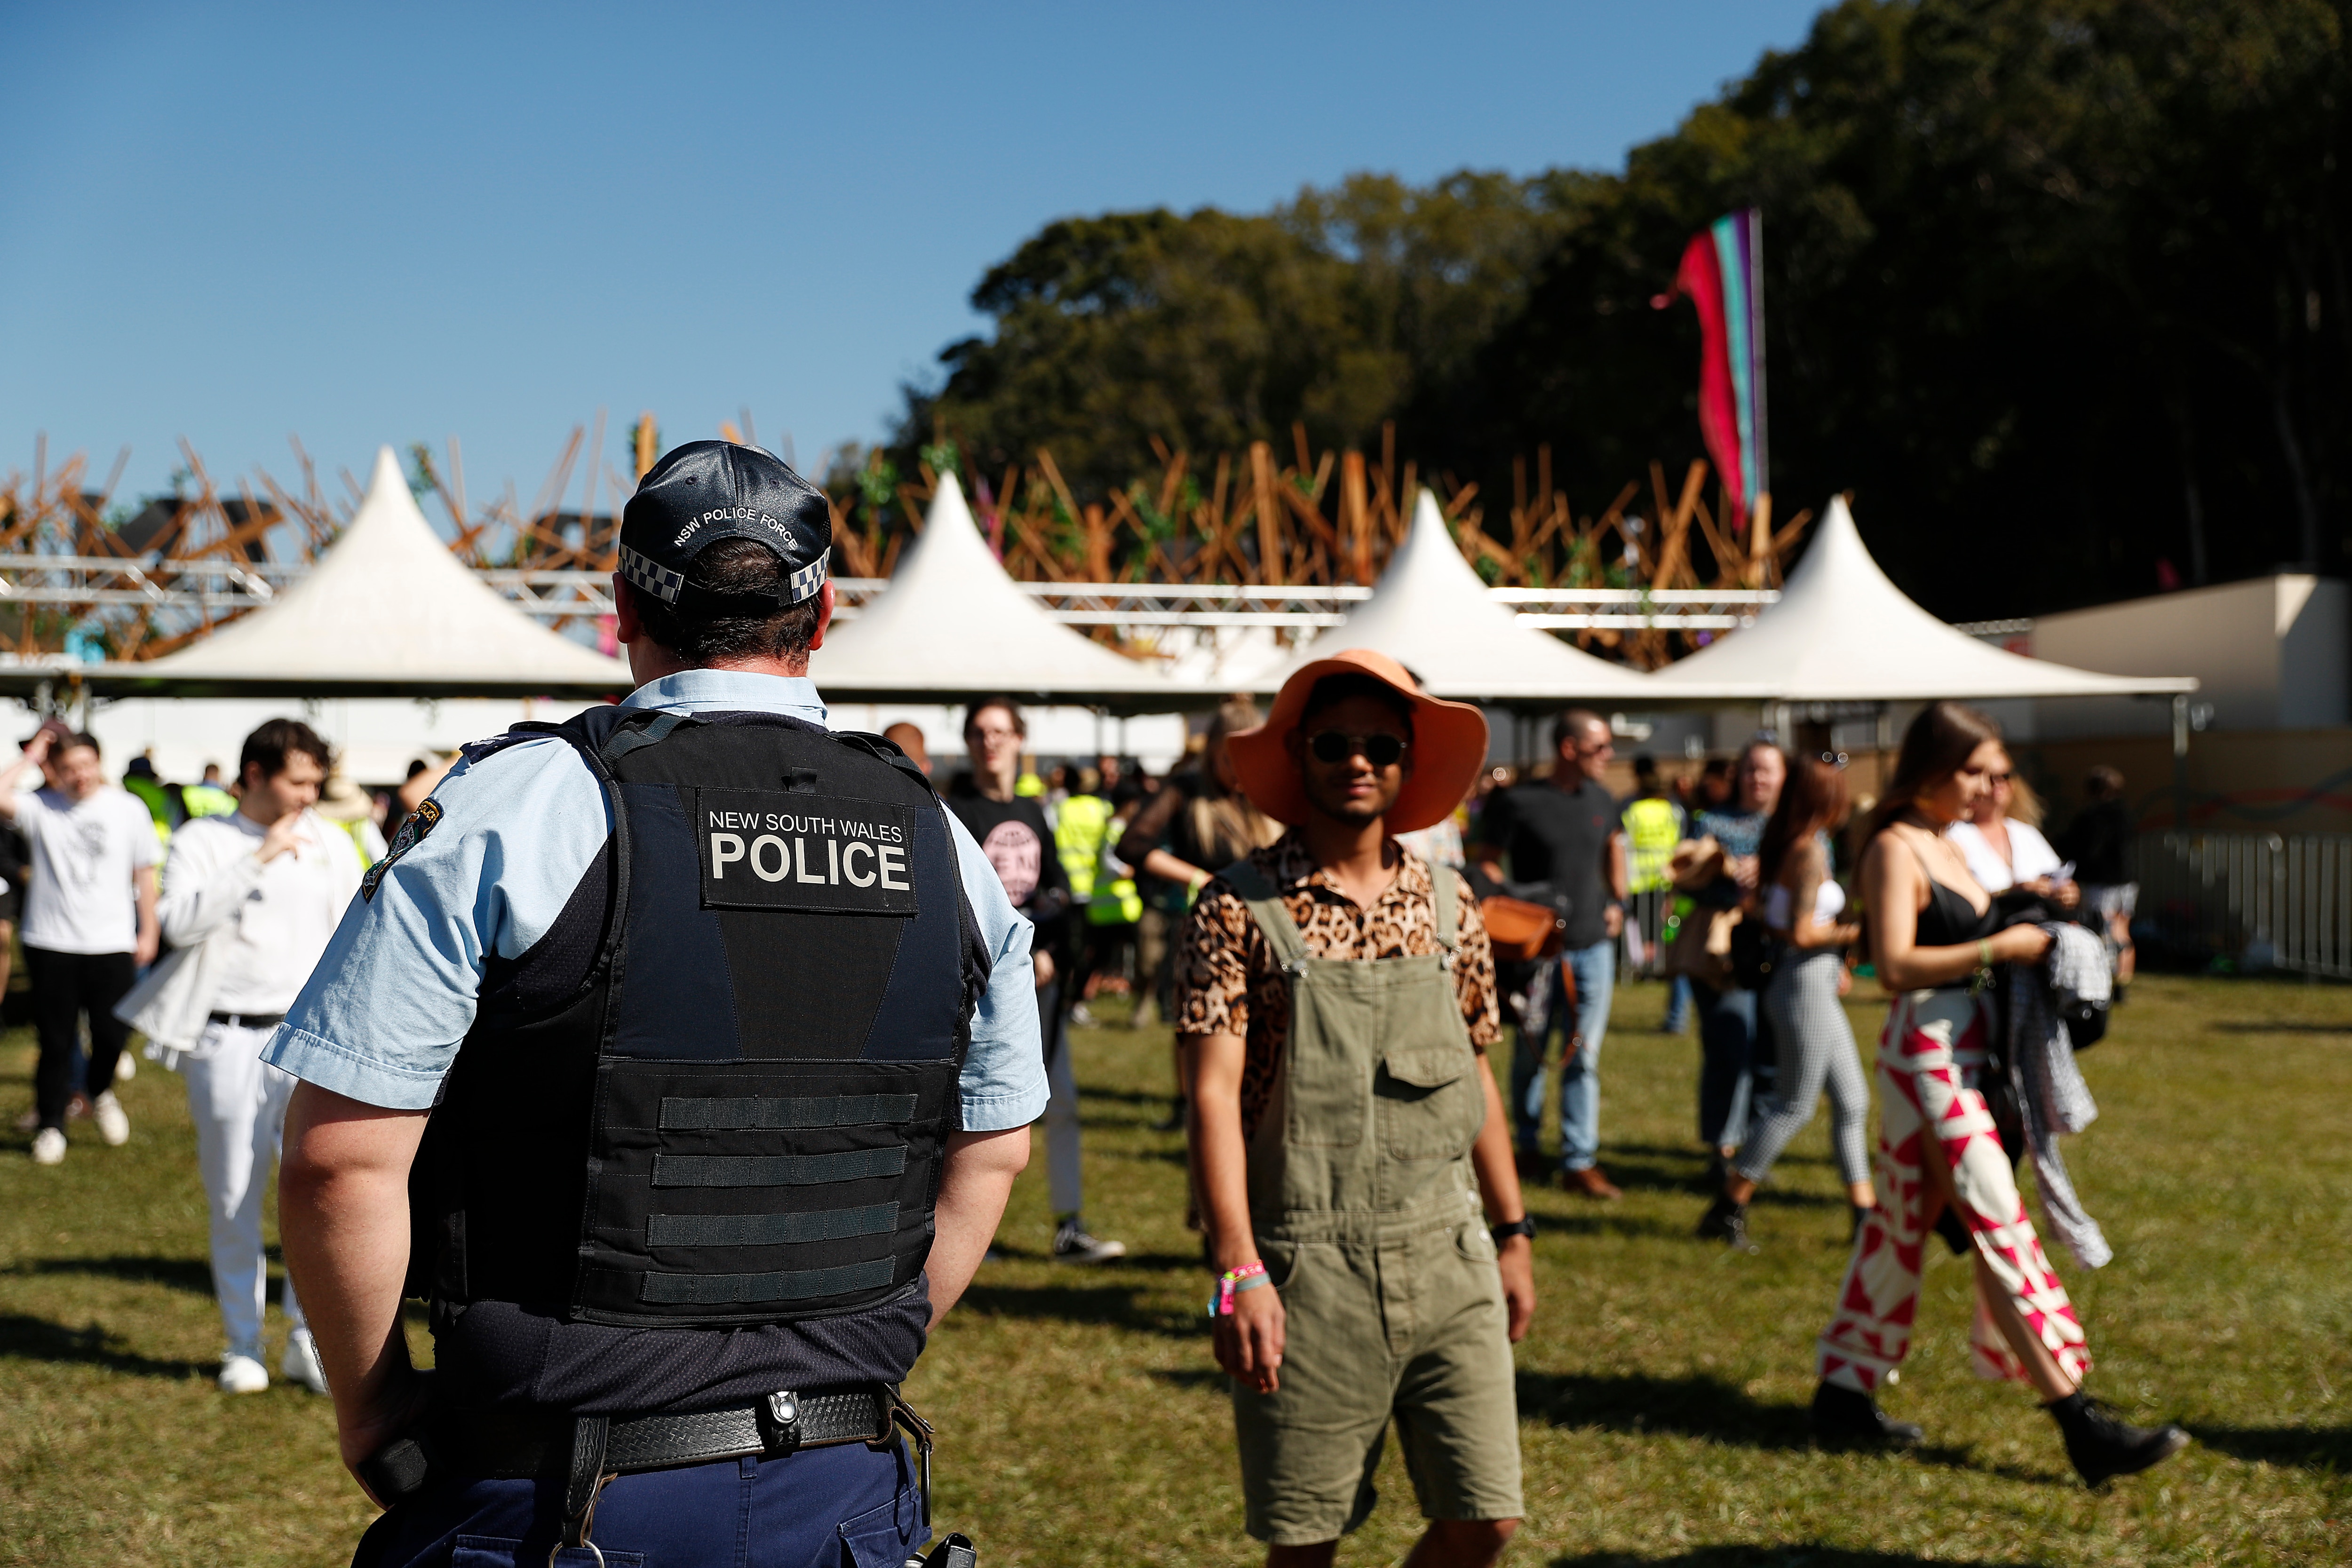 Police officers and drug detection dogs walk amongst festival goers by an entrance to Splendour In The Grass 2019 on July 19, 2019